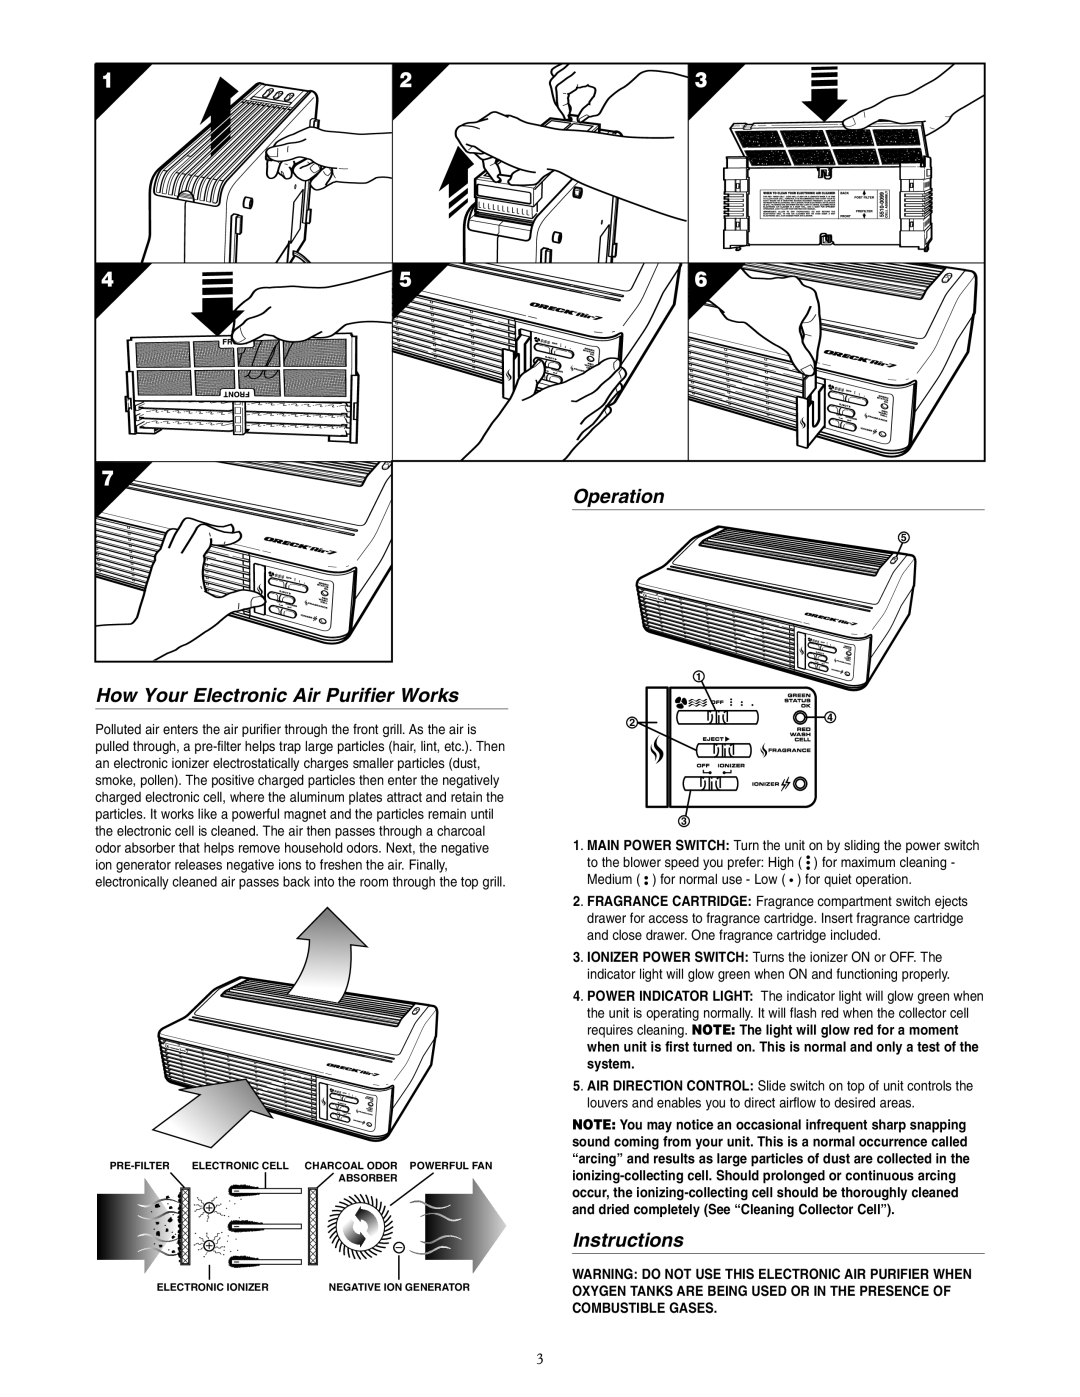 Oreck AIR7 warranty How Your Electronic Air Purifier Works, Instructions, Operation 